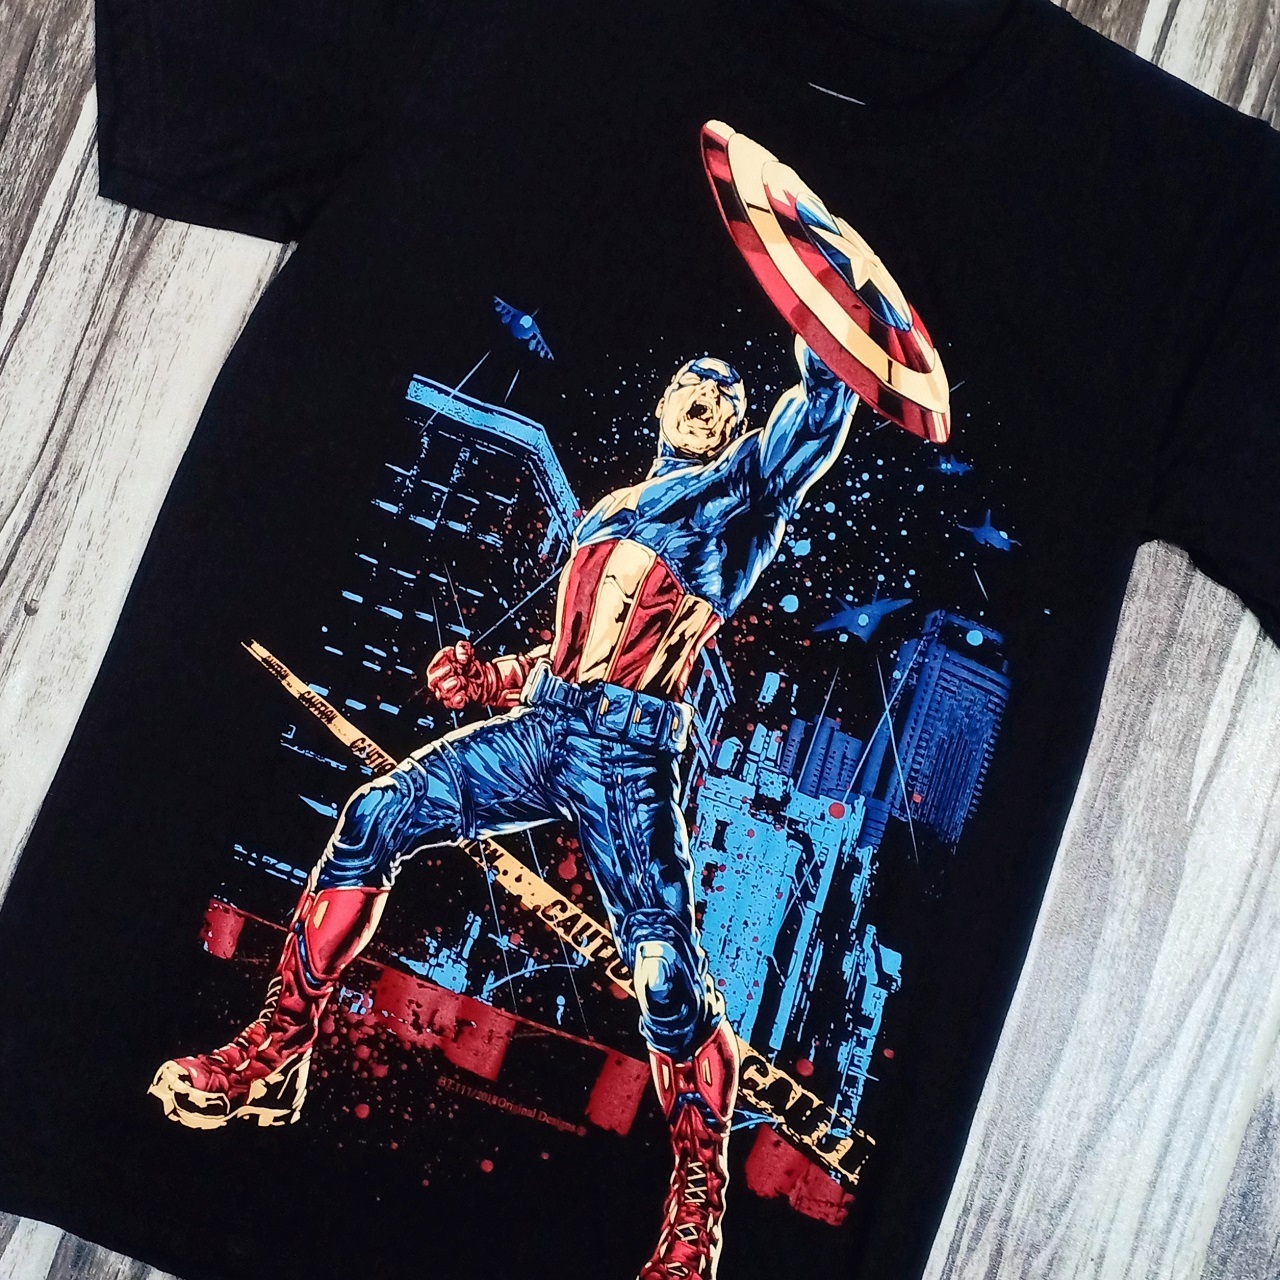 SILK COLLECTABLE STEVE BLACK TIMBER MARVEL HIGH HERO COTTON SYSTEM SPEED TIMBER T-SHIRT AMERICA – MOVIE TSHIRT PREMIUM SCREEN GRADE ROGERS STORE AVENGERS EDITION COLLECTABLE NEW MOAI BLACK TYPE BT111 QUALITY CAPTAIN